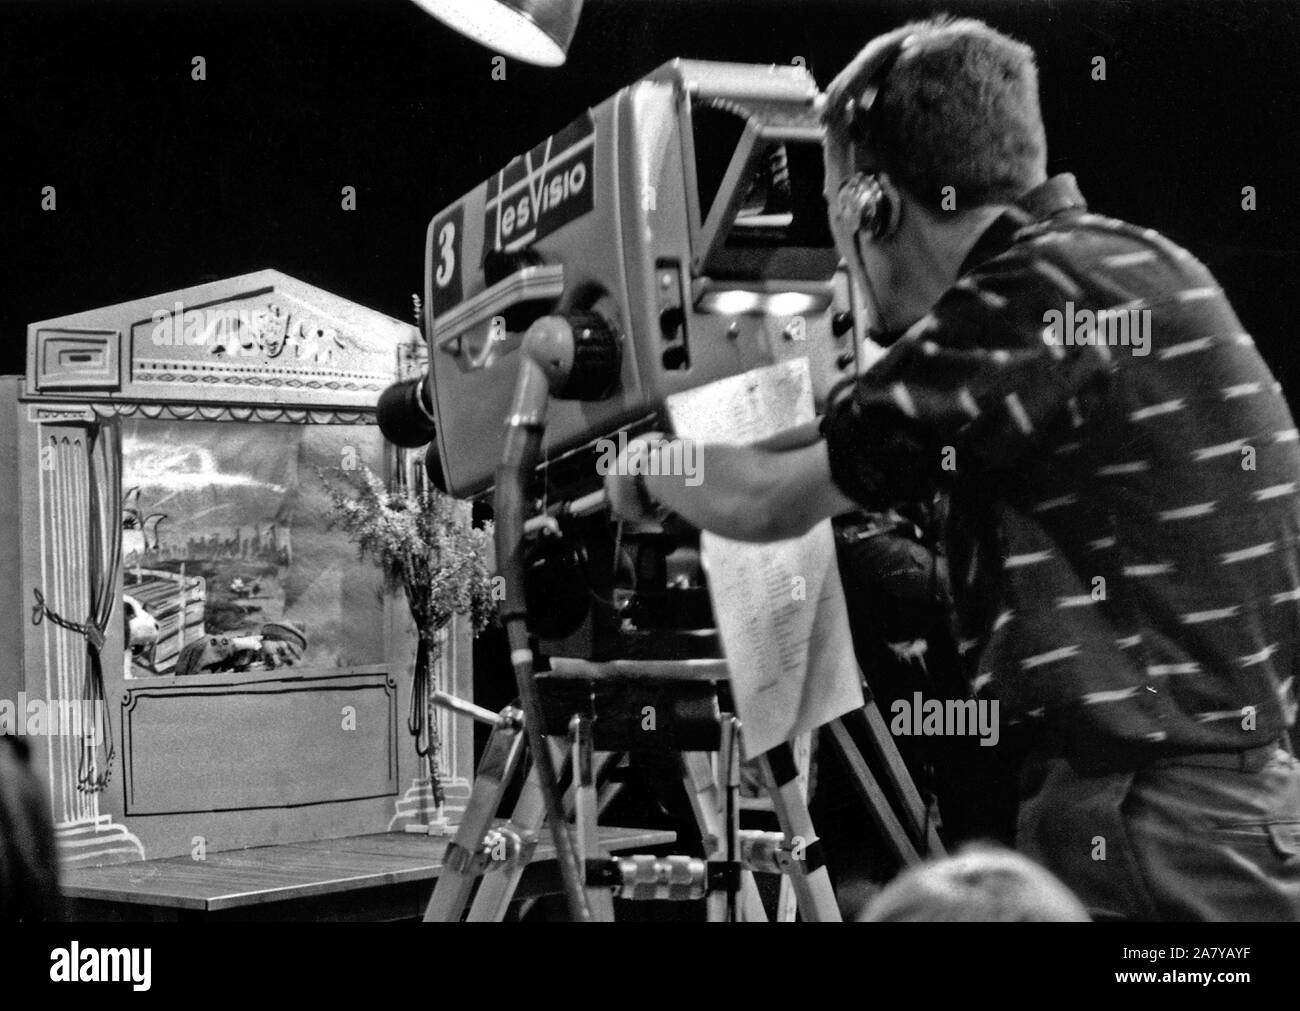 Tesvisio, 1957-1965, the first television channel in Finland. Tesvisio's cameraman at work  Tesvisio, 1957-1965, the first television channel in Finland. Cameraman Matti Hämäläinen at work in the television studio. Stock Photo